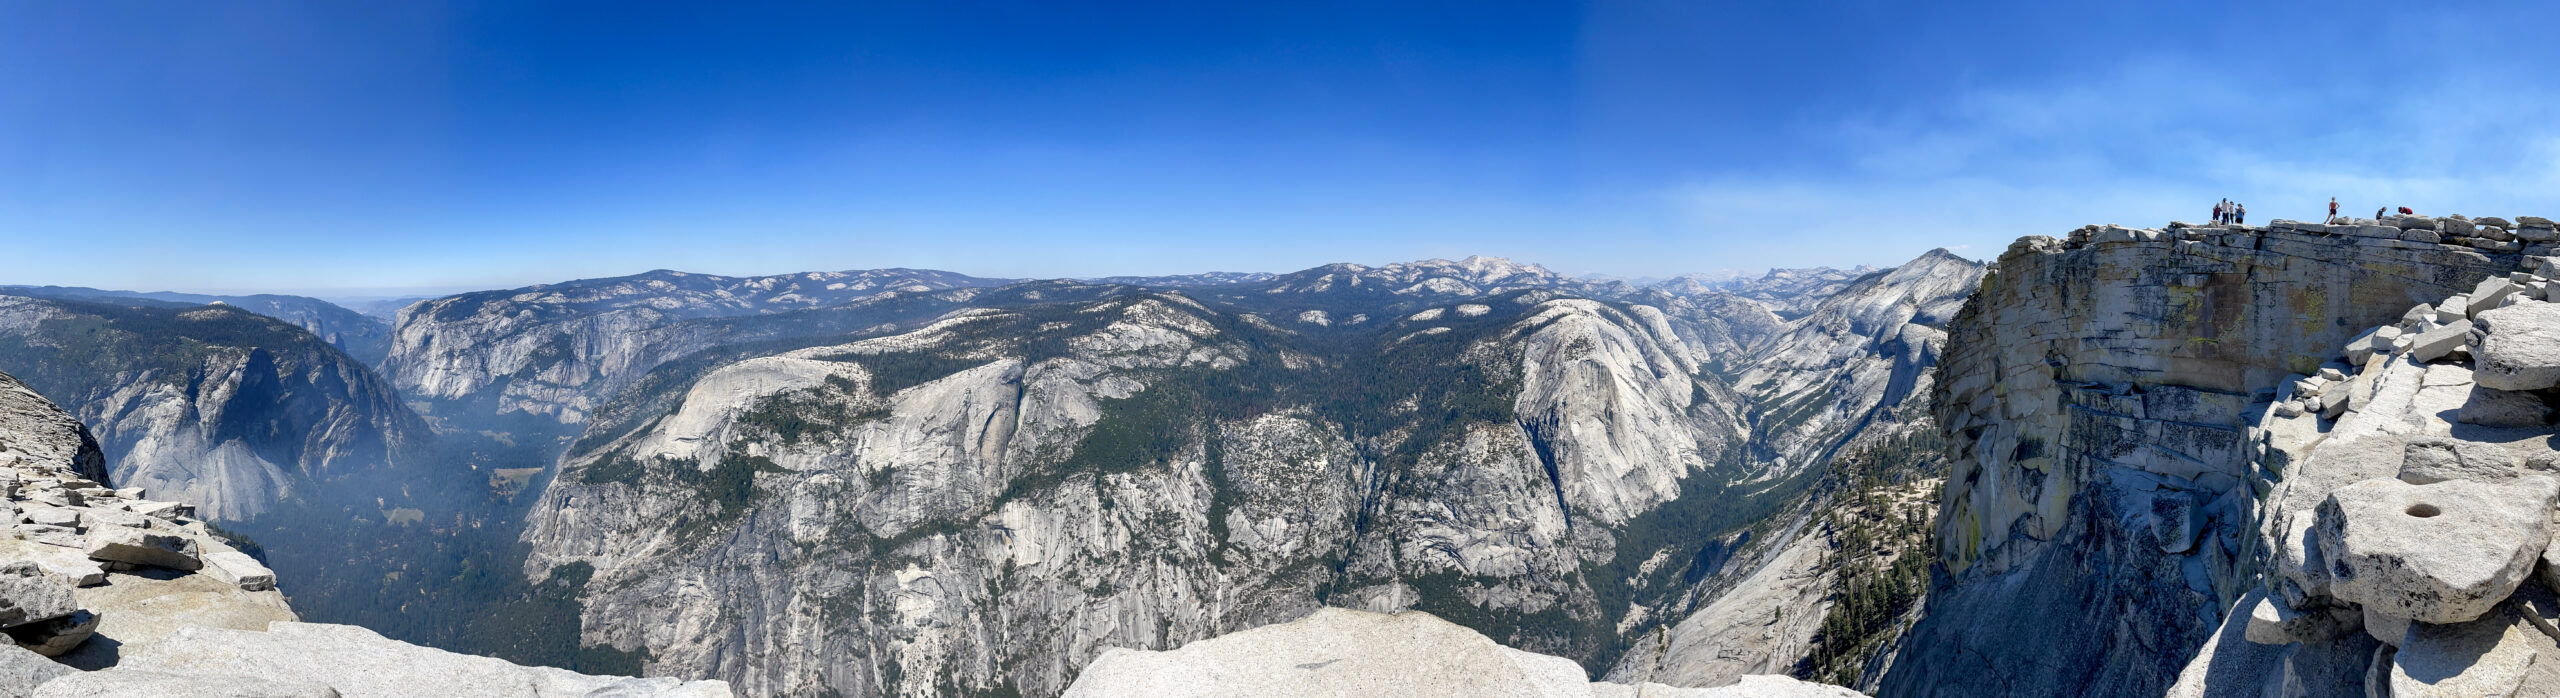 View from the summit of Half Dome in Yosemite